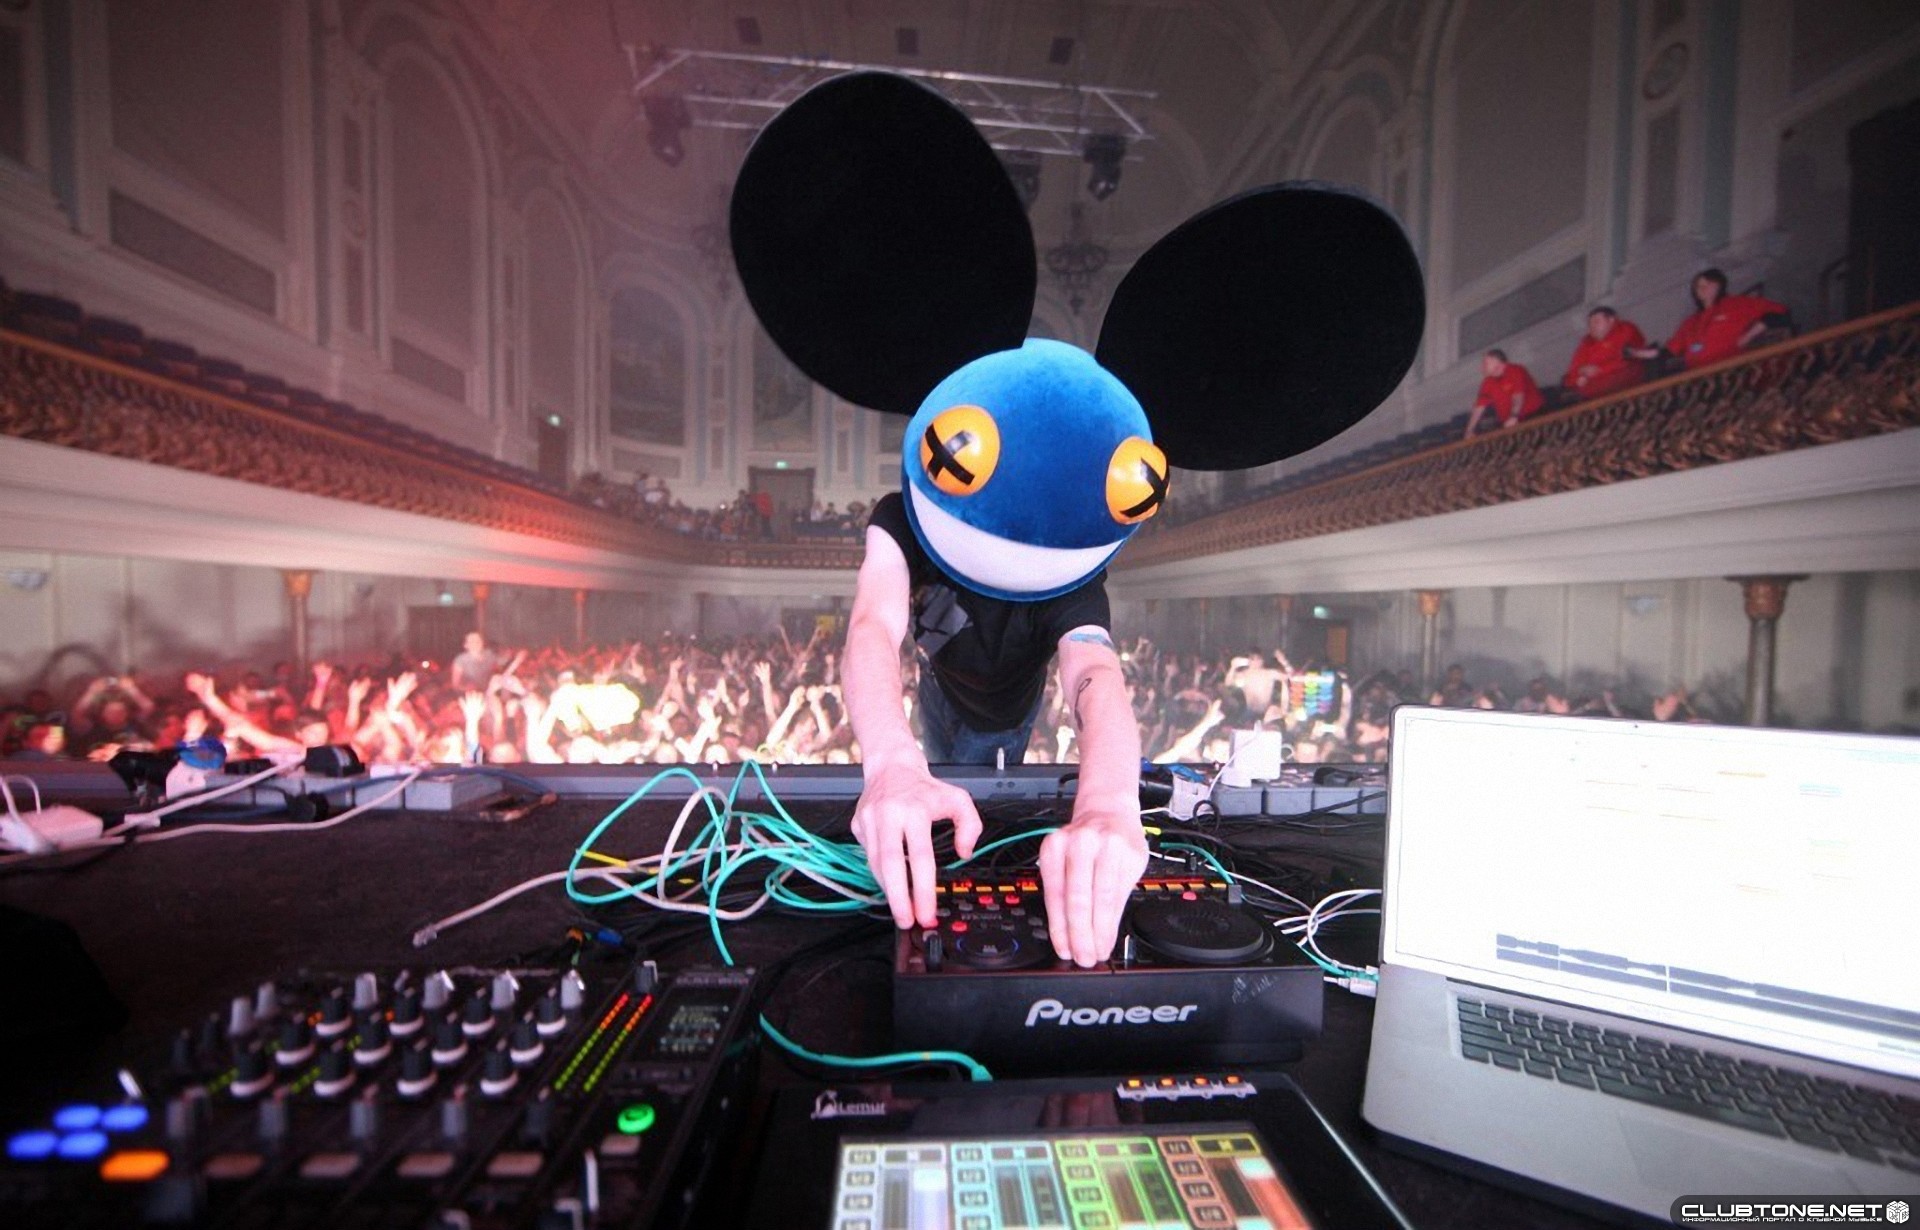 General 1920x1230 Deadmau5 music mouse ears mixing consoles crowds pioneer (logo) audio electronic music DJ